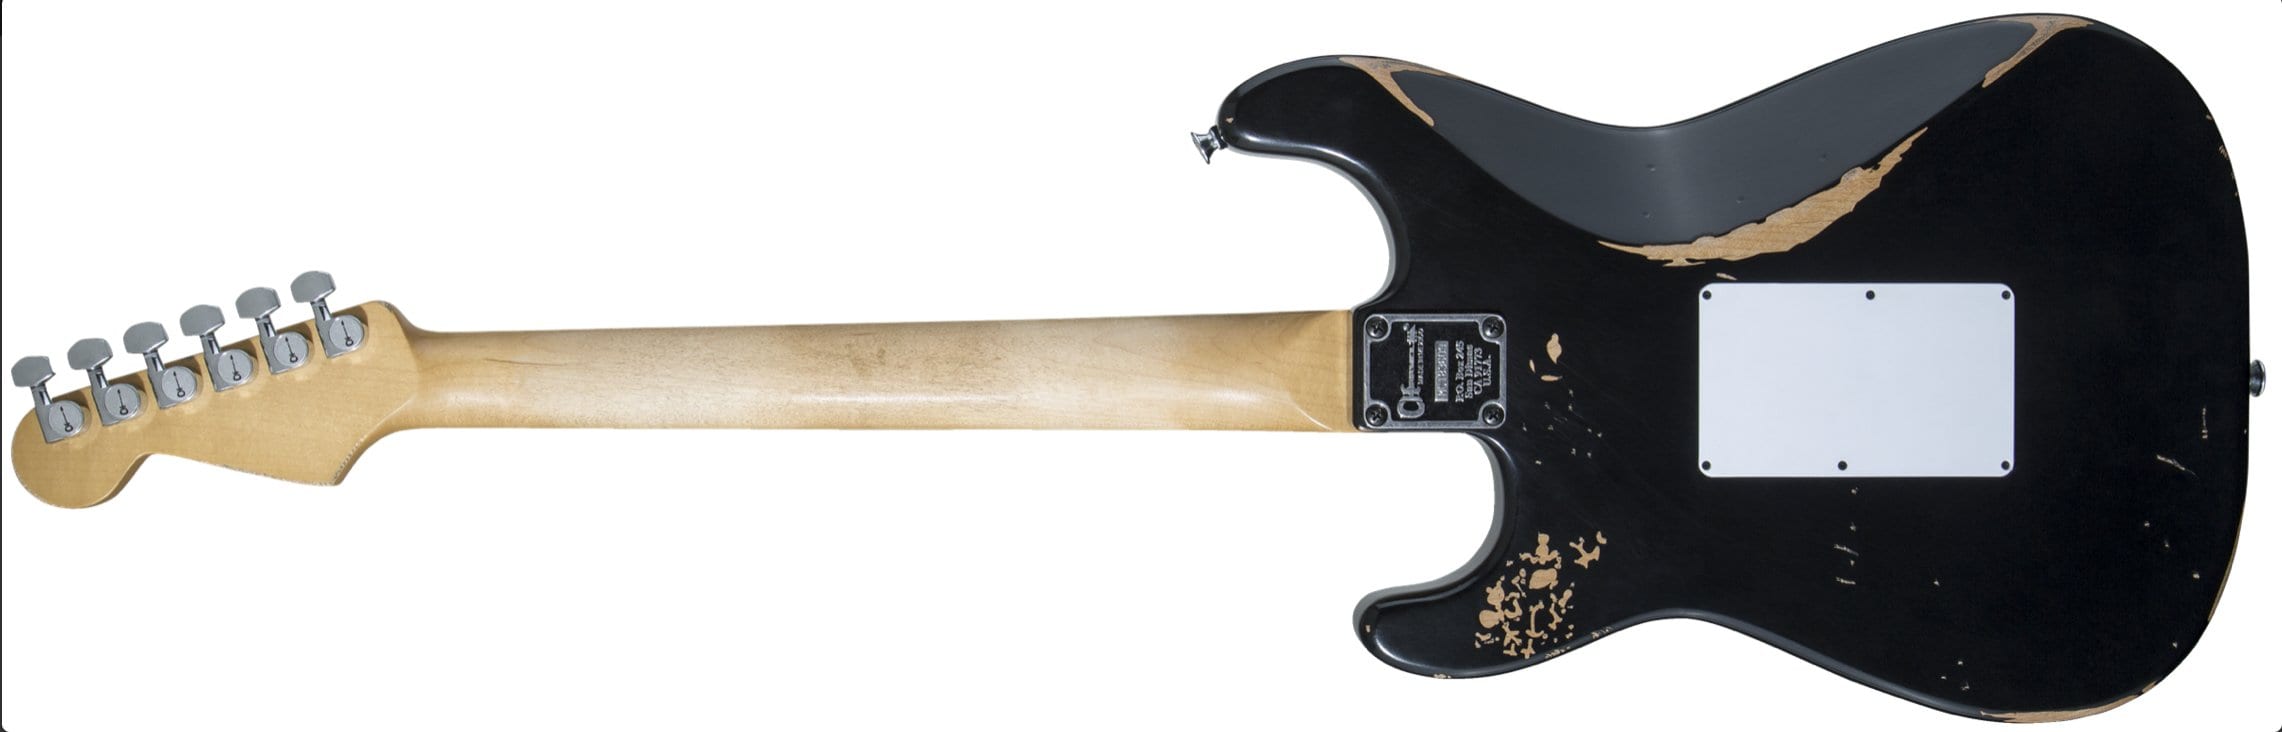 Charvel Limited Edition Super Stock SC1 rear